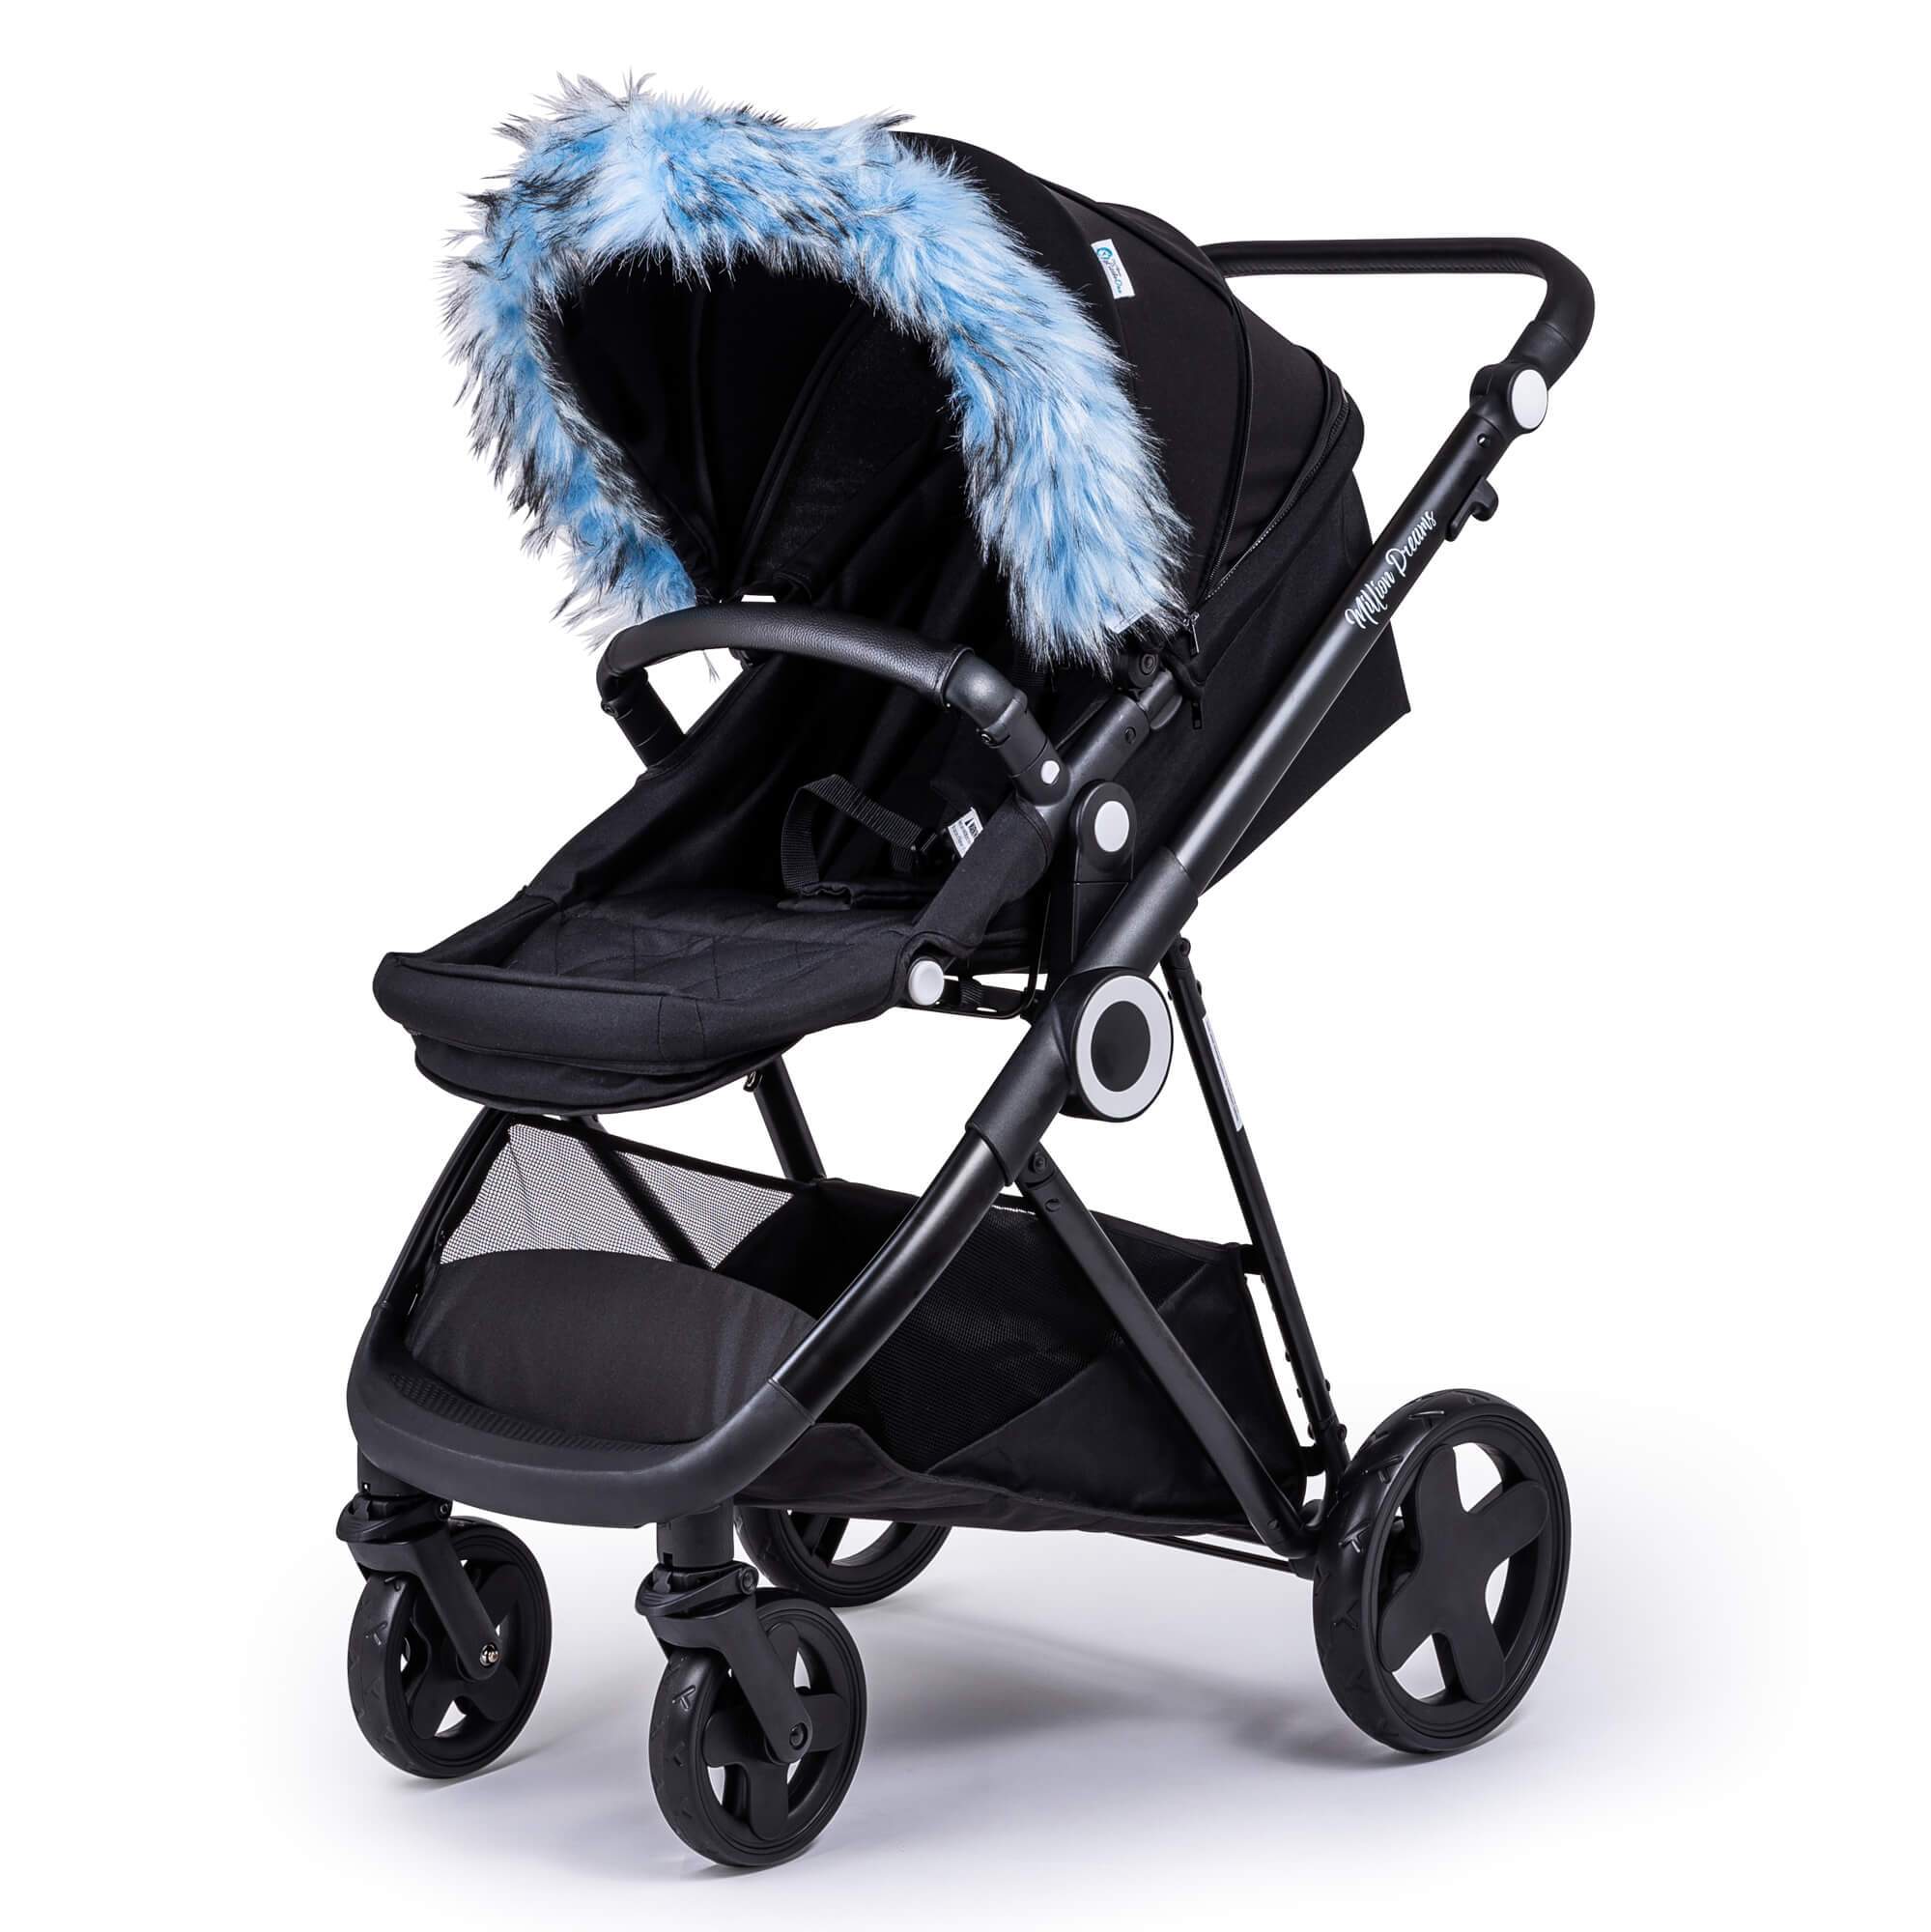 Pram Fur Hood Trim Attachment for Pushchair Compatible with Quinny - Light Blue / Fits All Models | For Your Little One